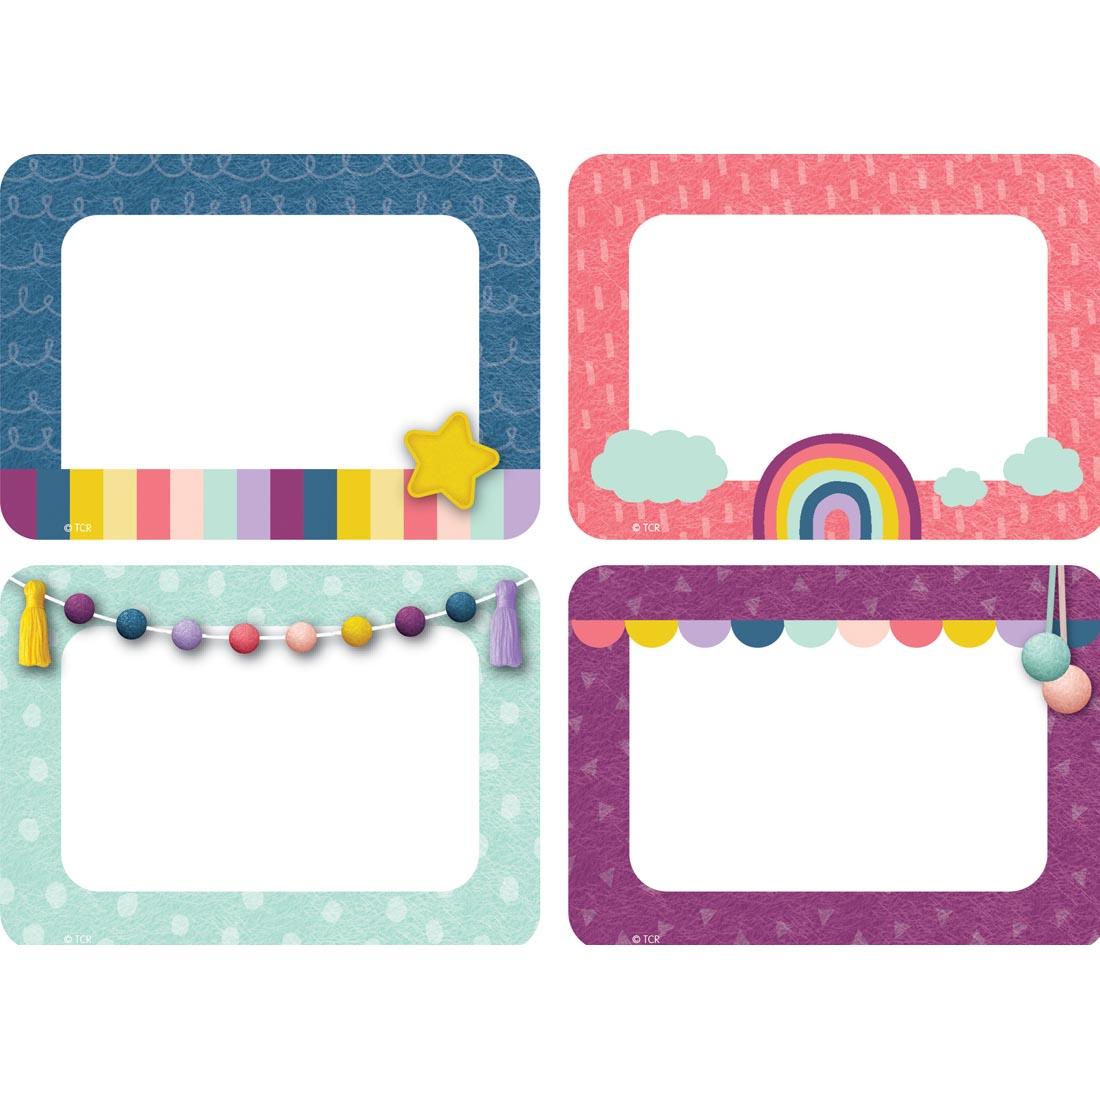 Name Tags / Labels from the Oh Happy Day collection by Teacher Created Resources